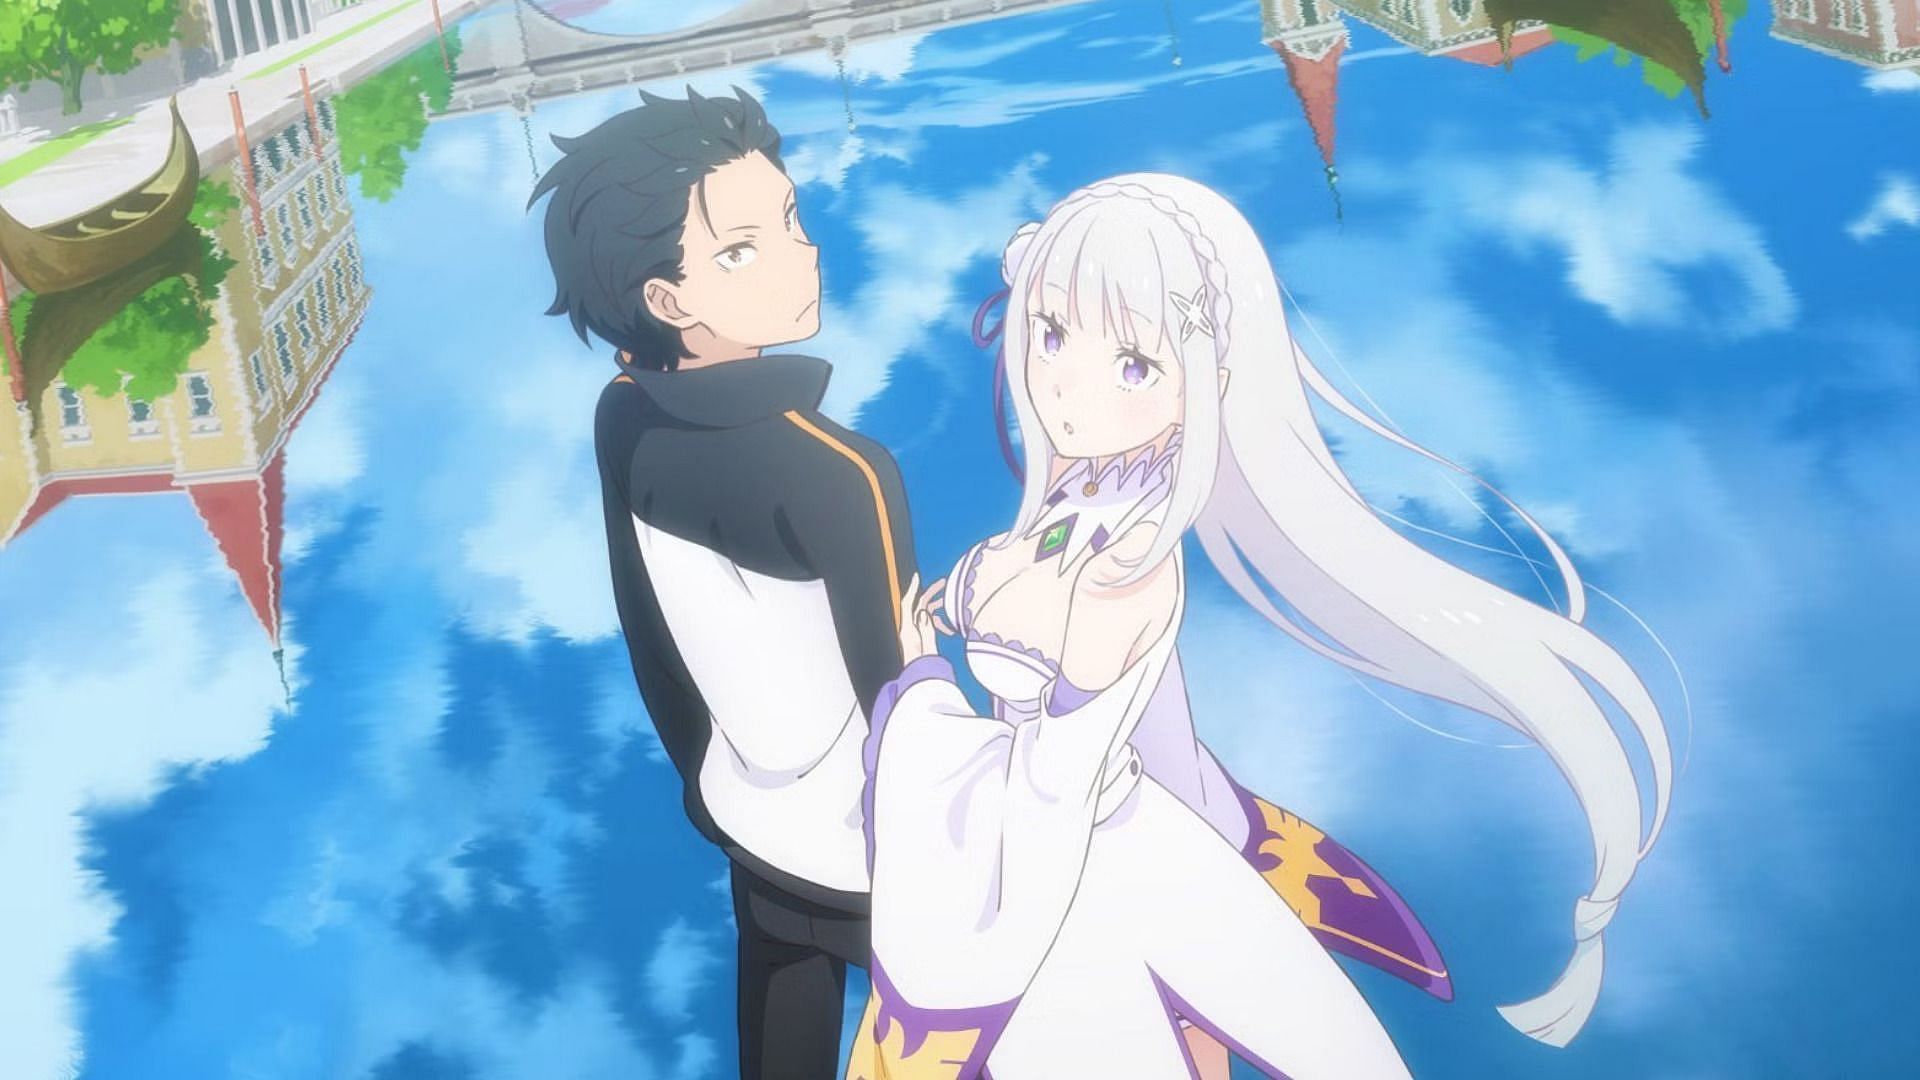 Re:Zero Season 3 confirmed with an official trailer and key visual